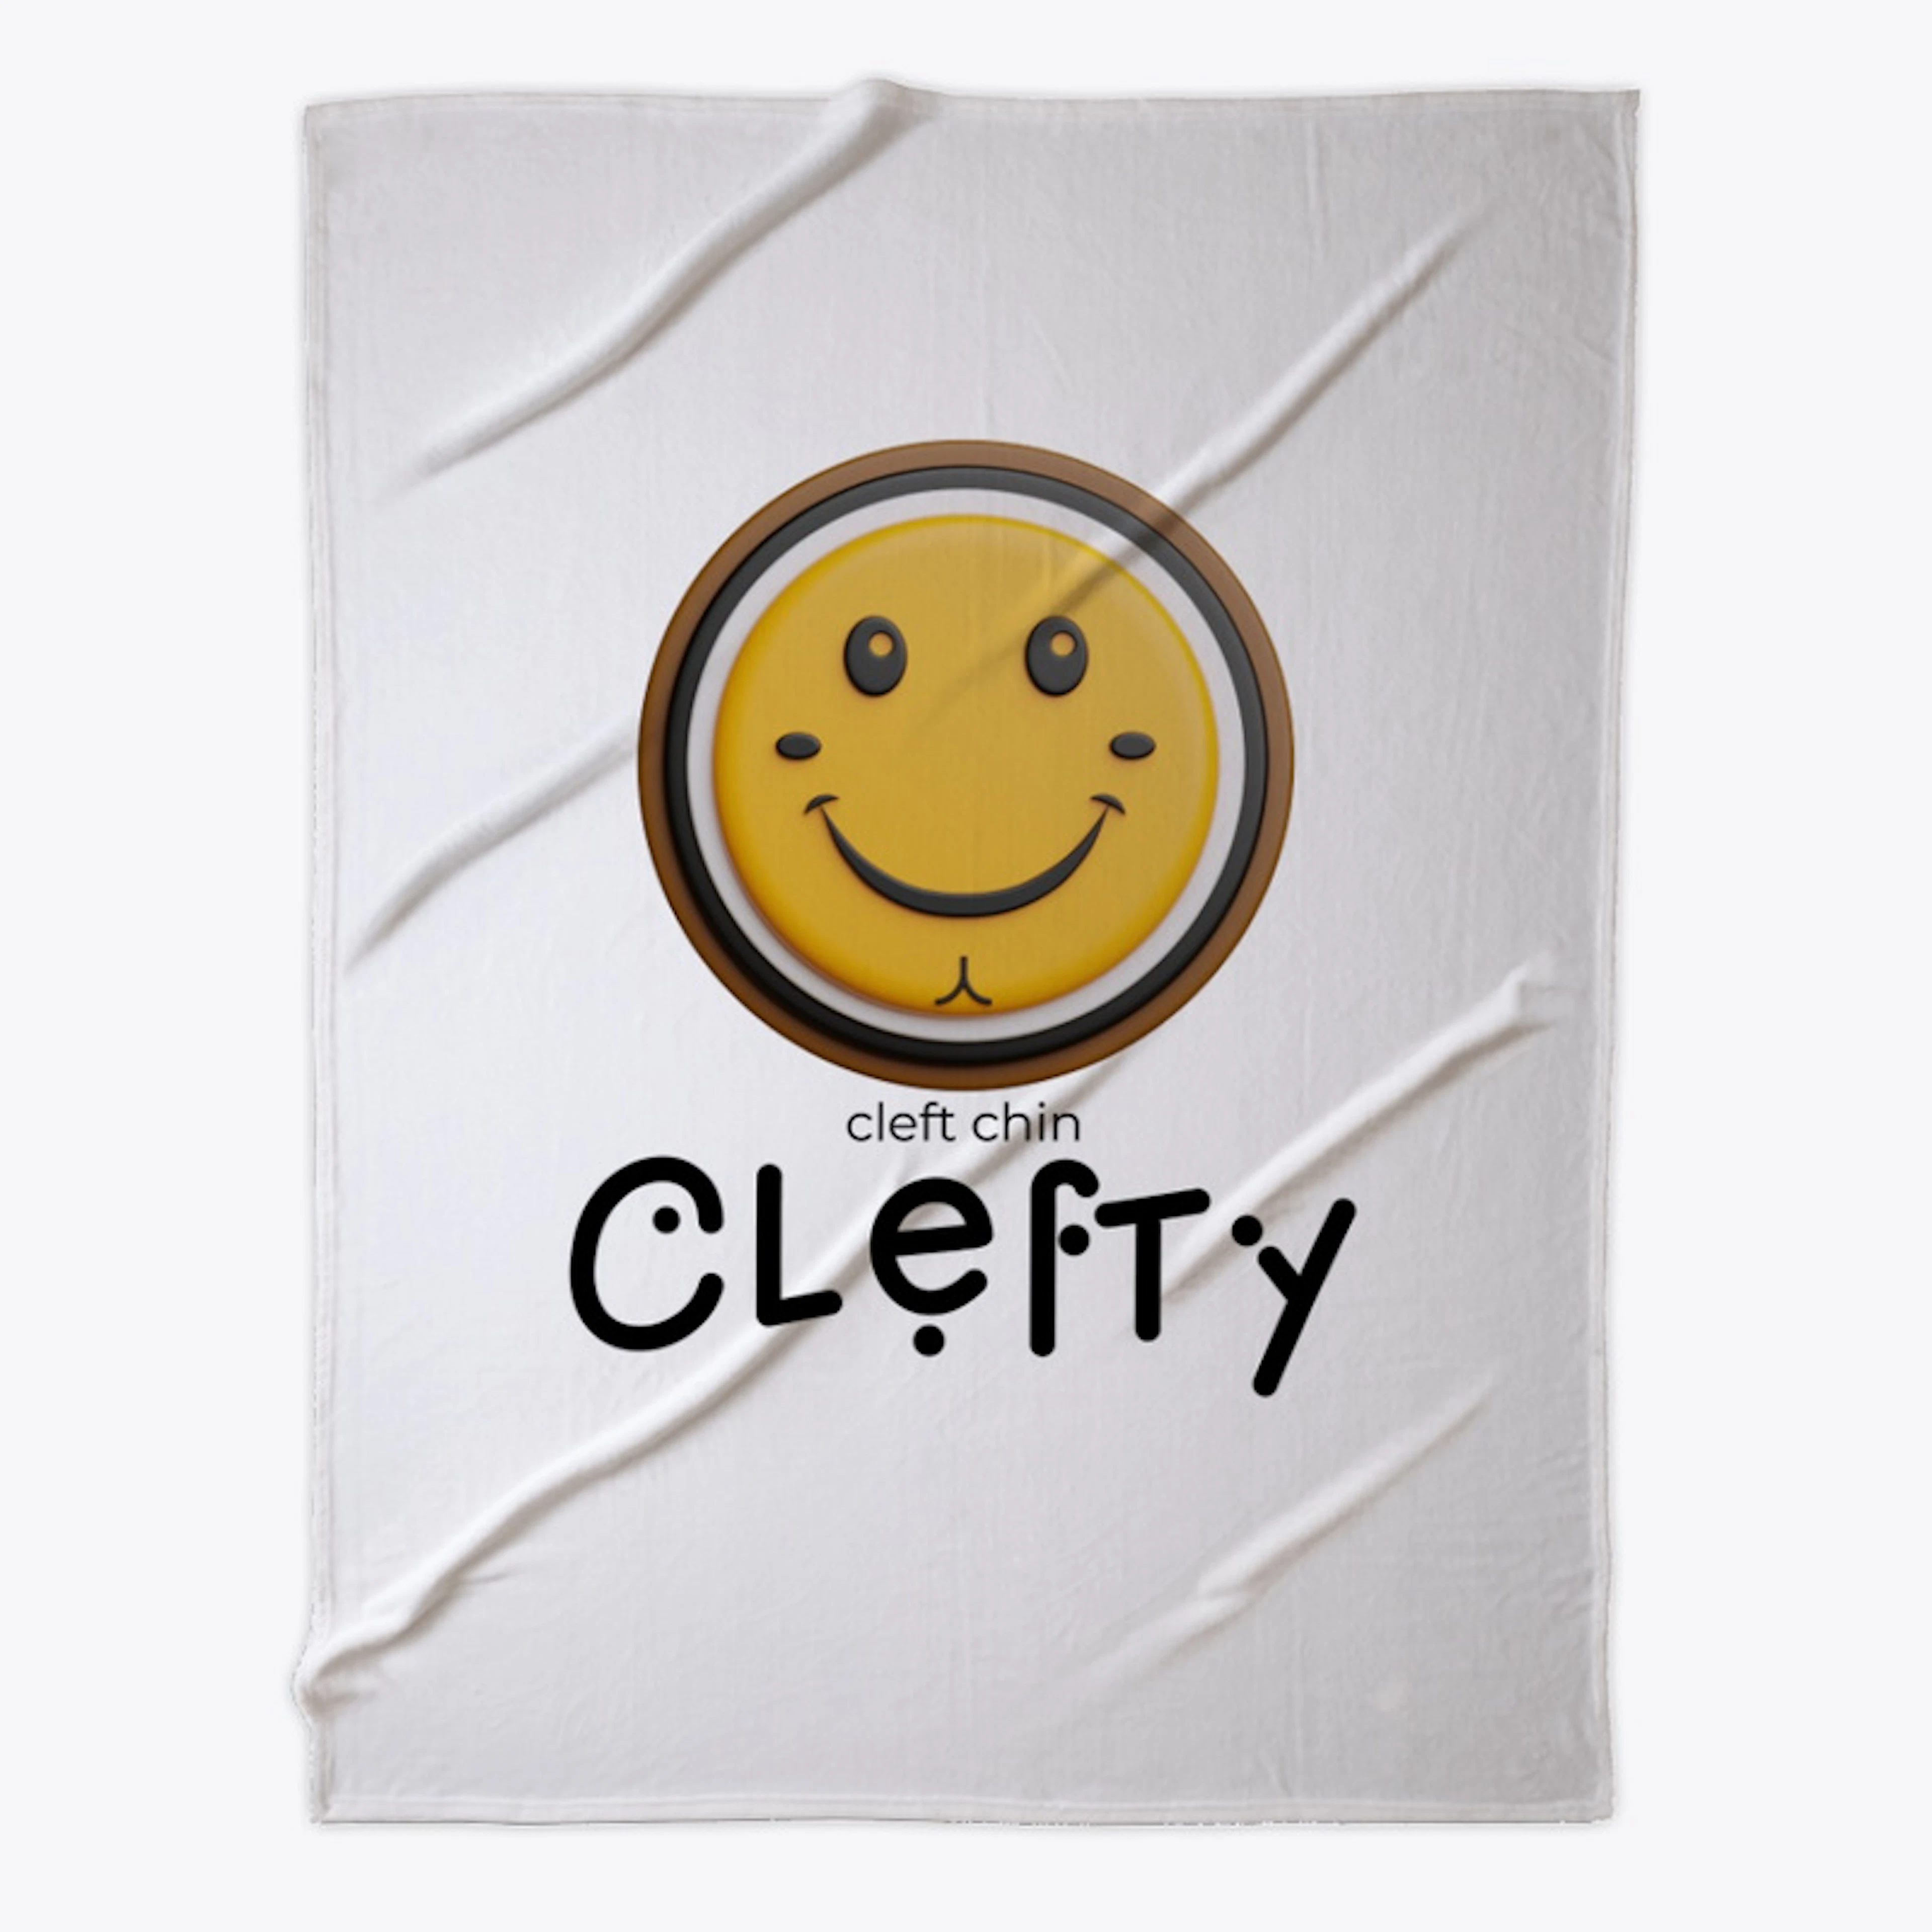 Cleft Chin Clefty